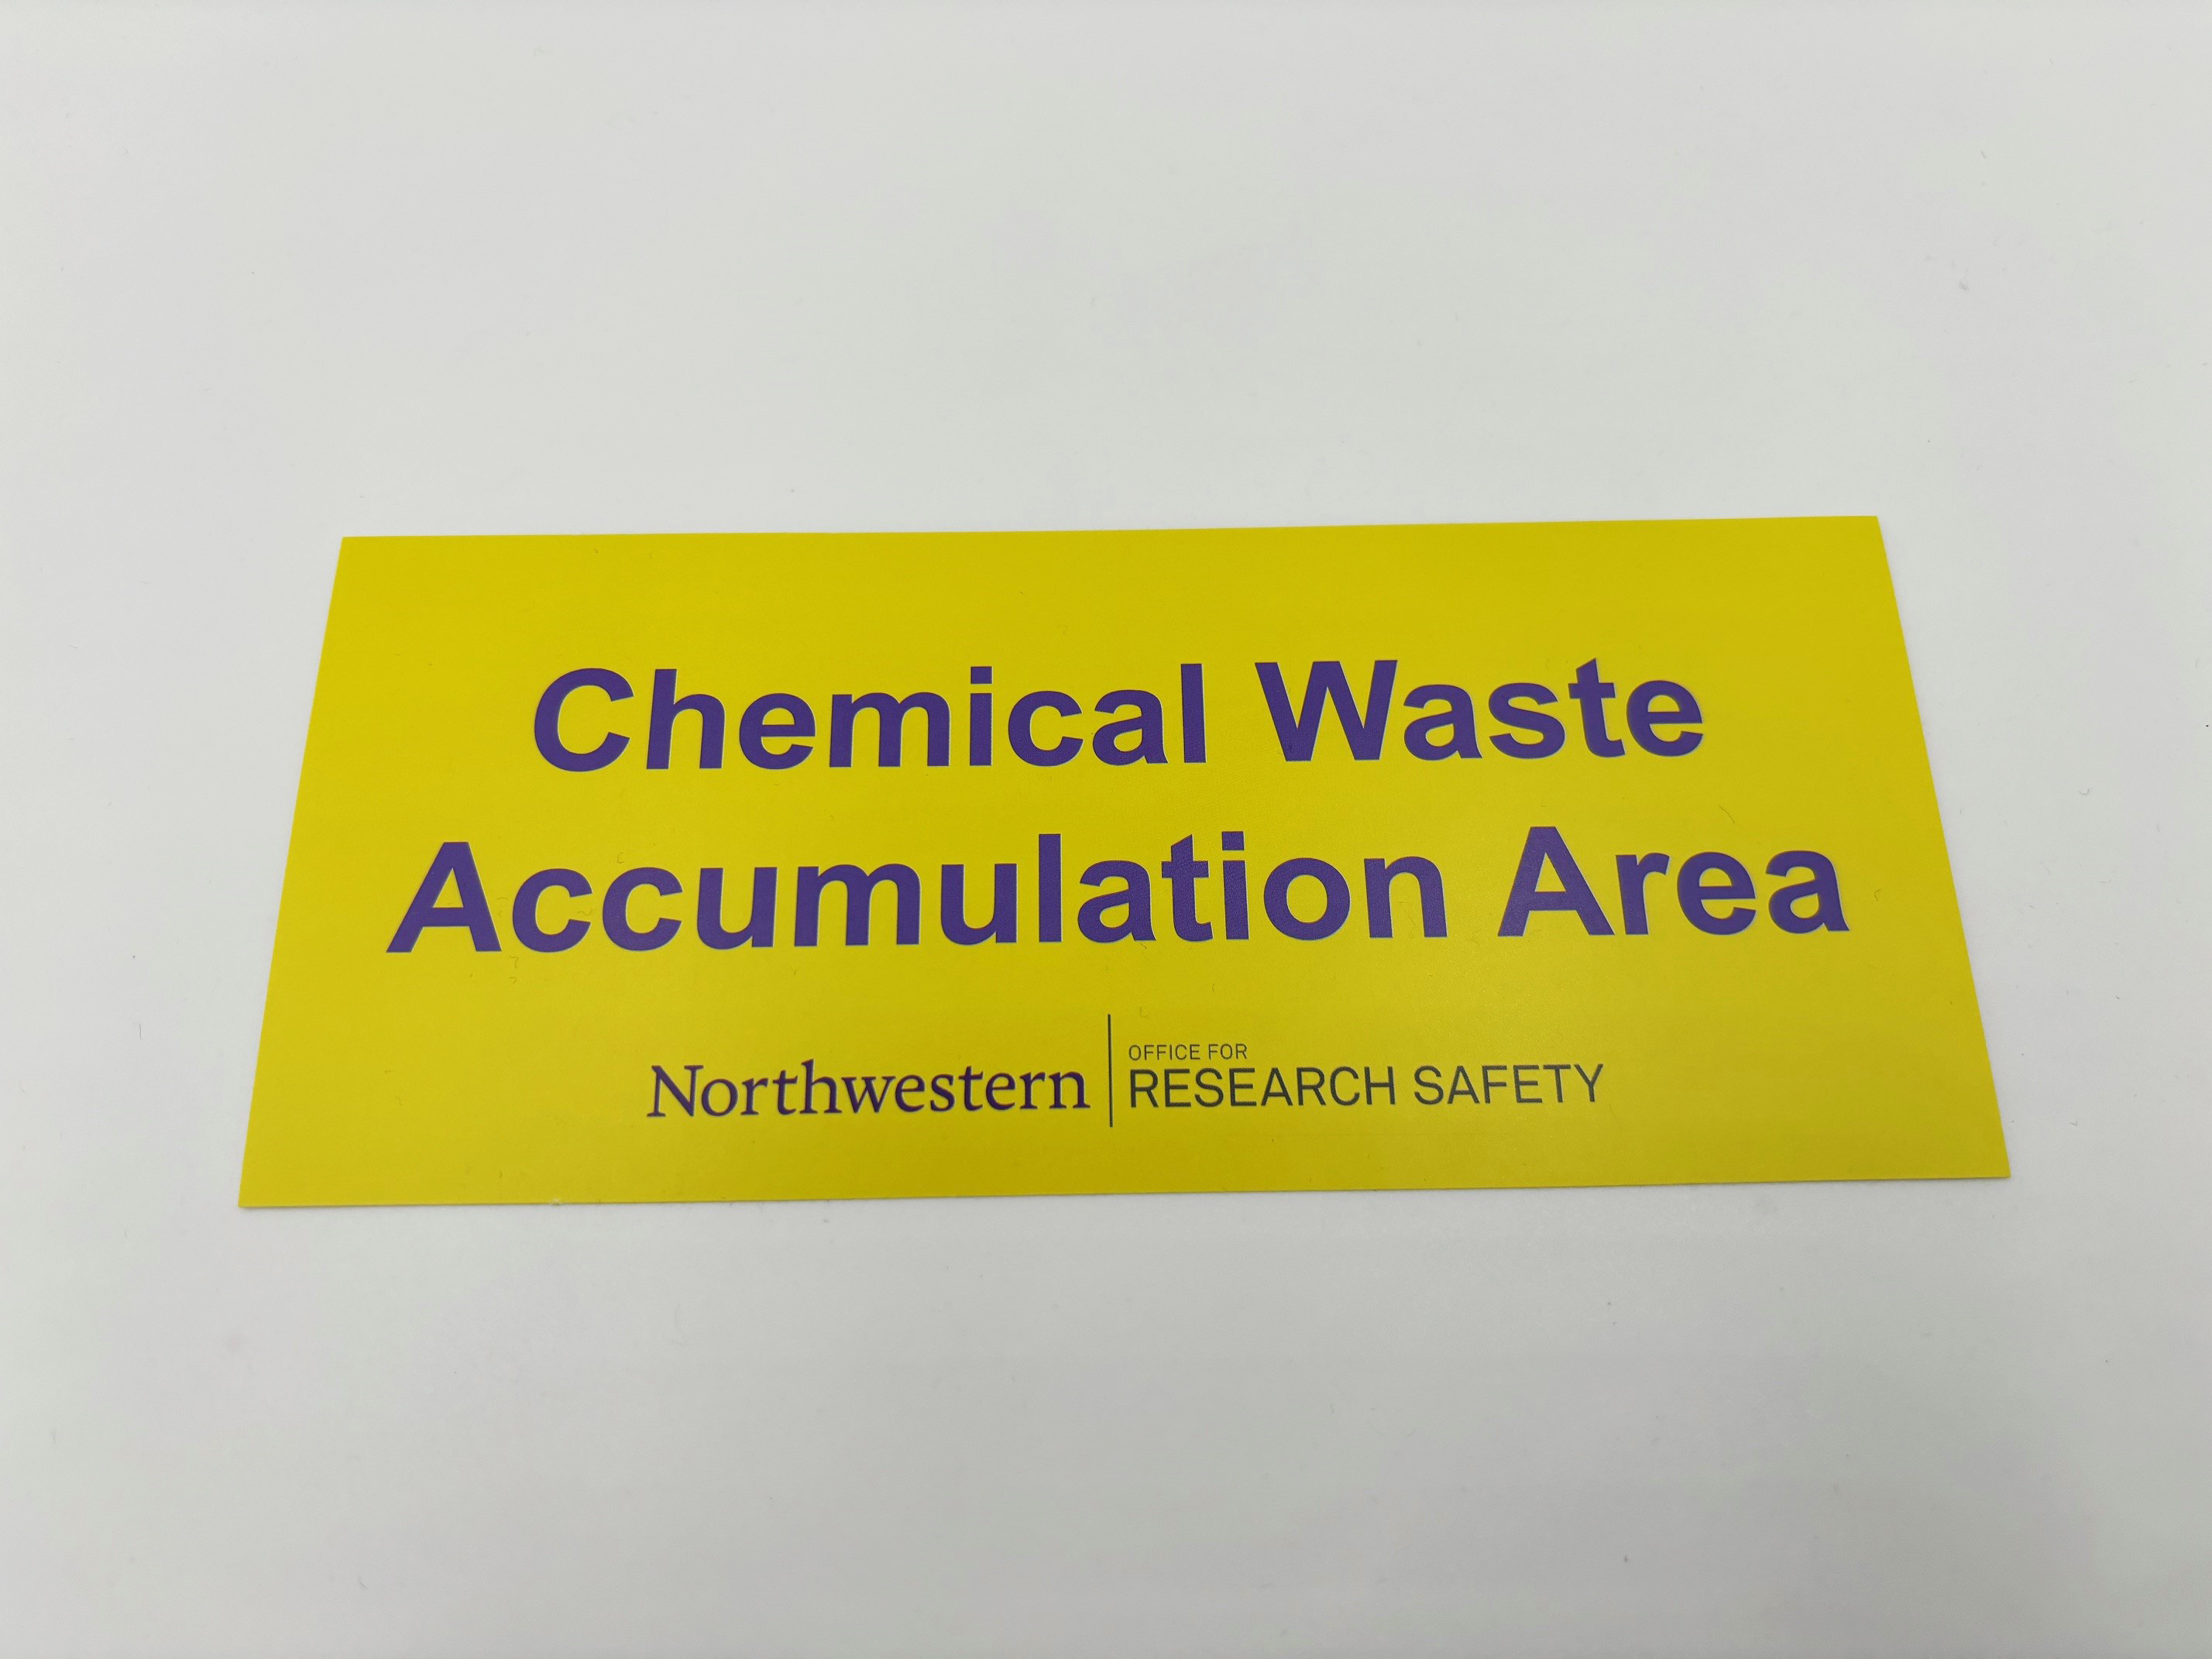 Chemical Waste Accumulation Area label